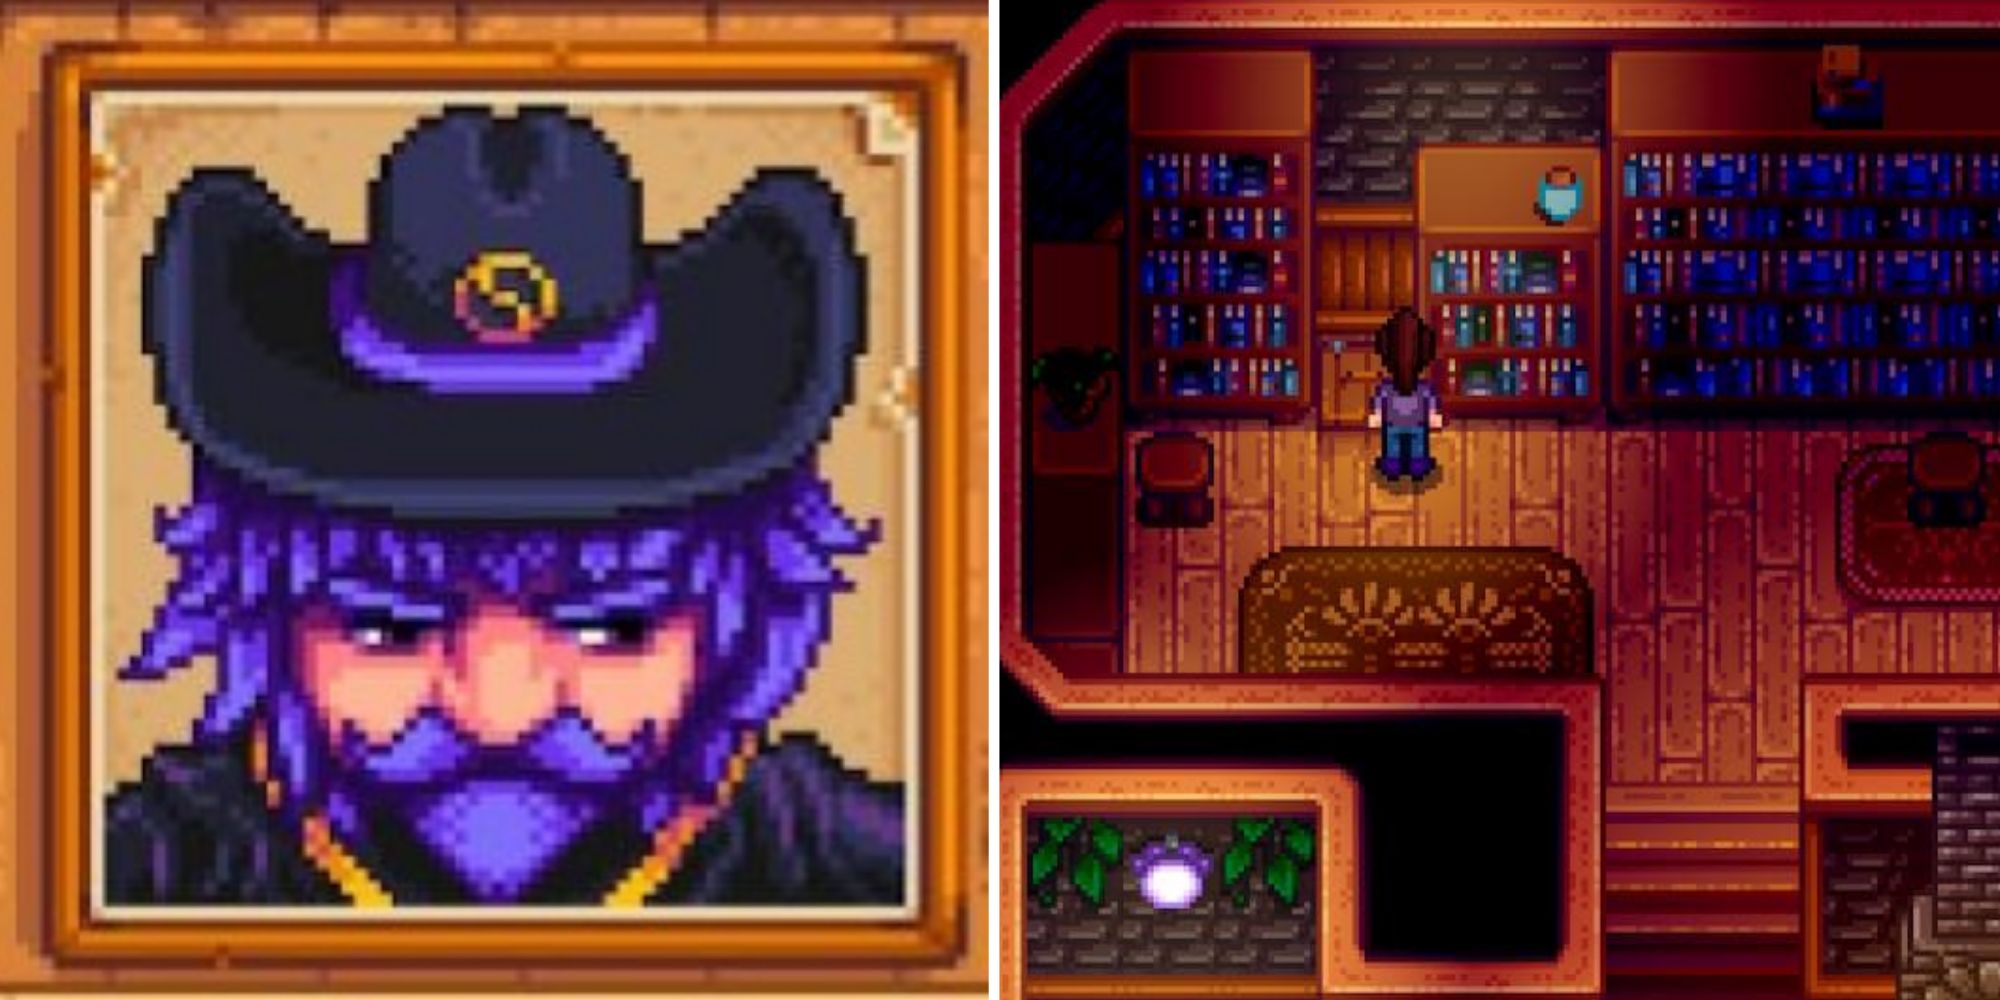 the wizard's portrait and going into his basement